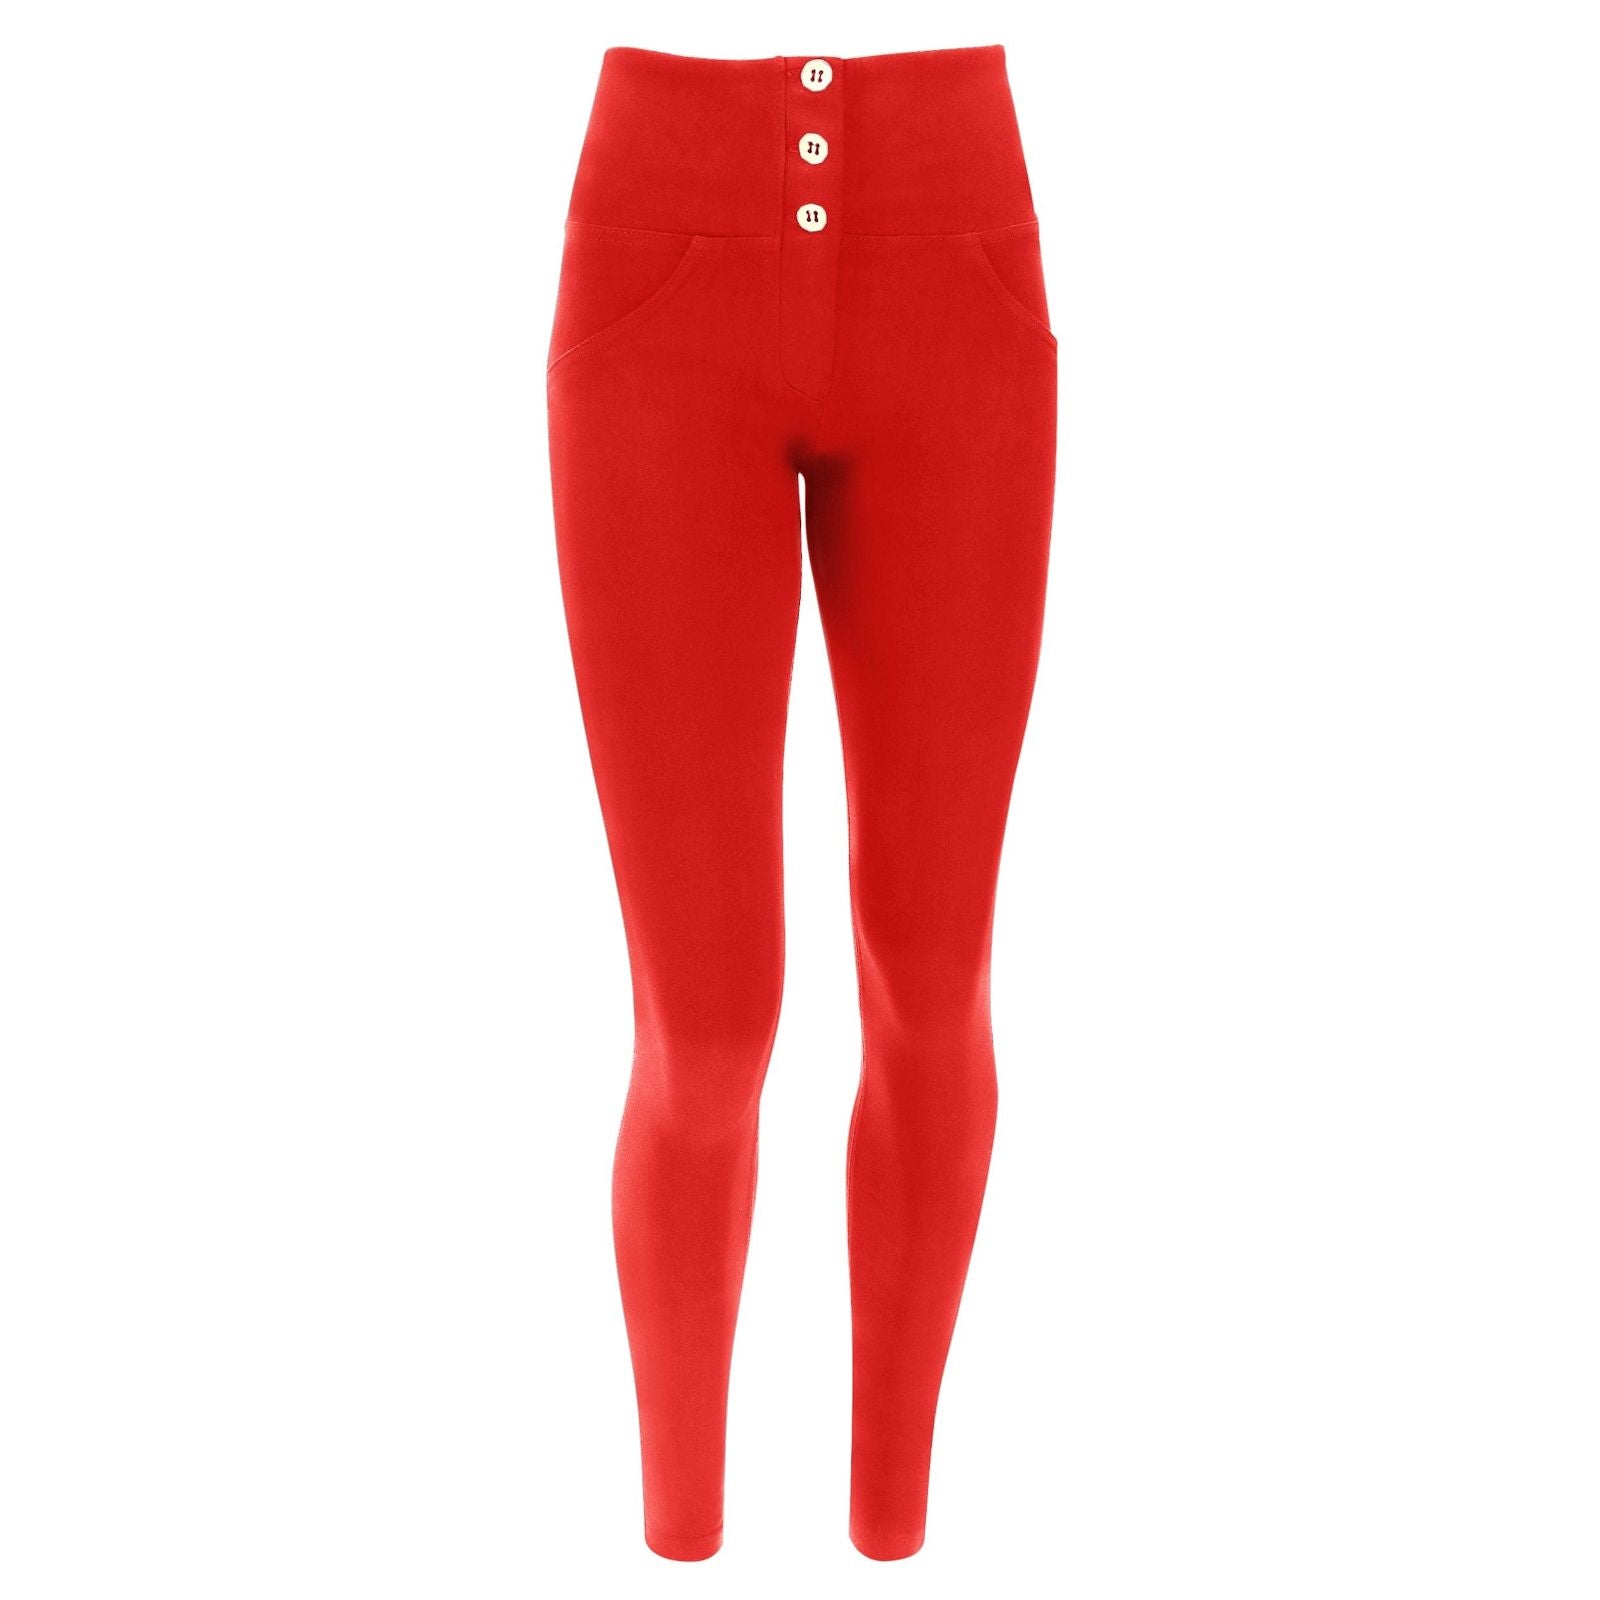 WR.UP® shaping trousers - High waist - Full Length - Chili Pepper 2